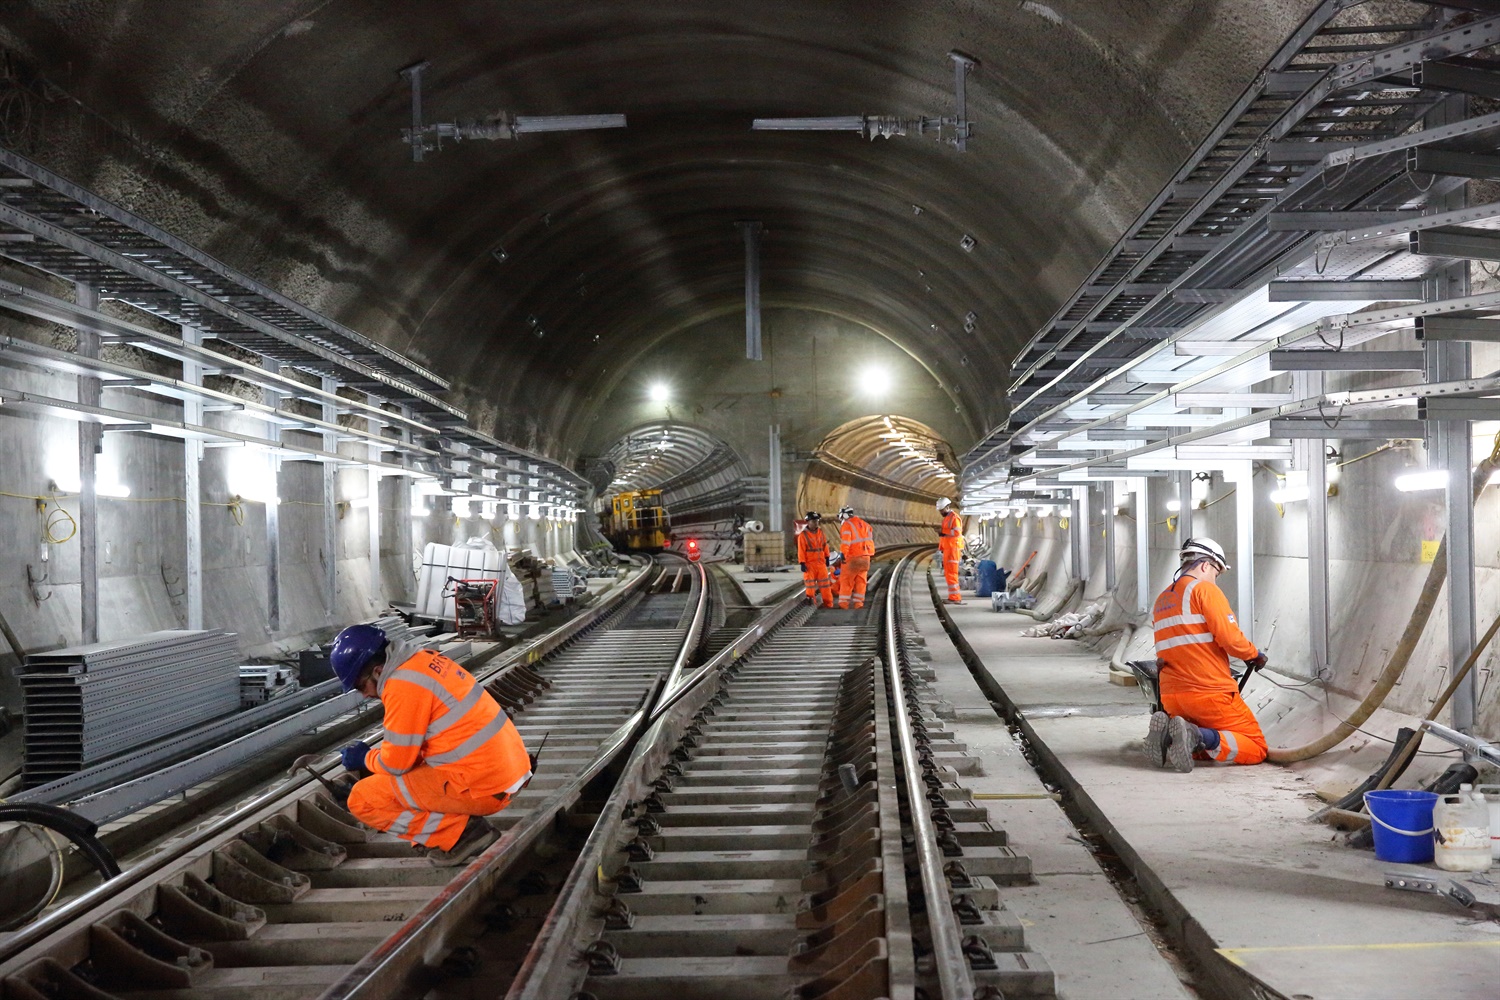 Minister confirms there are ‘no plans’ to extend Crossrail to Basingstoke